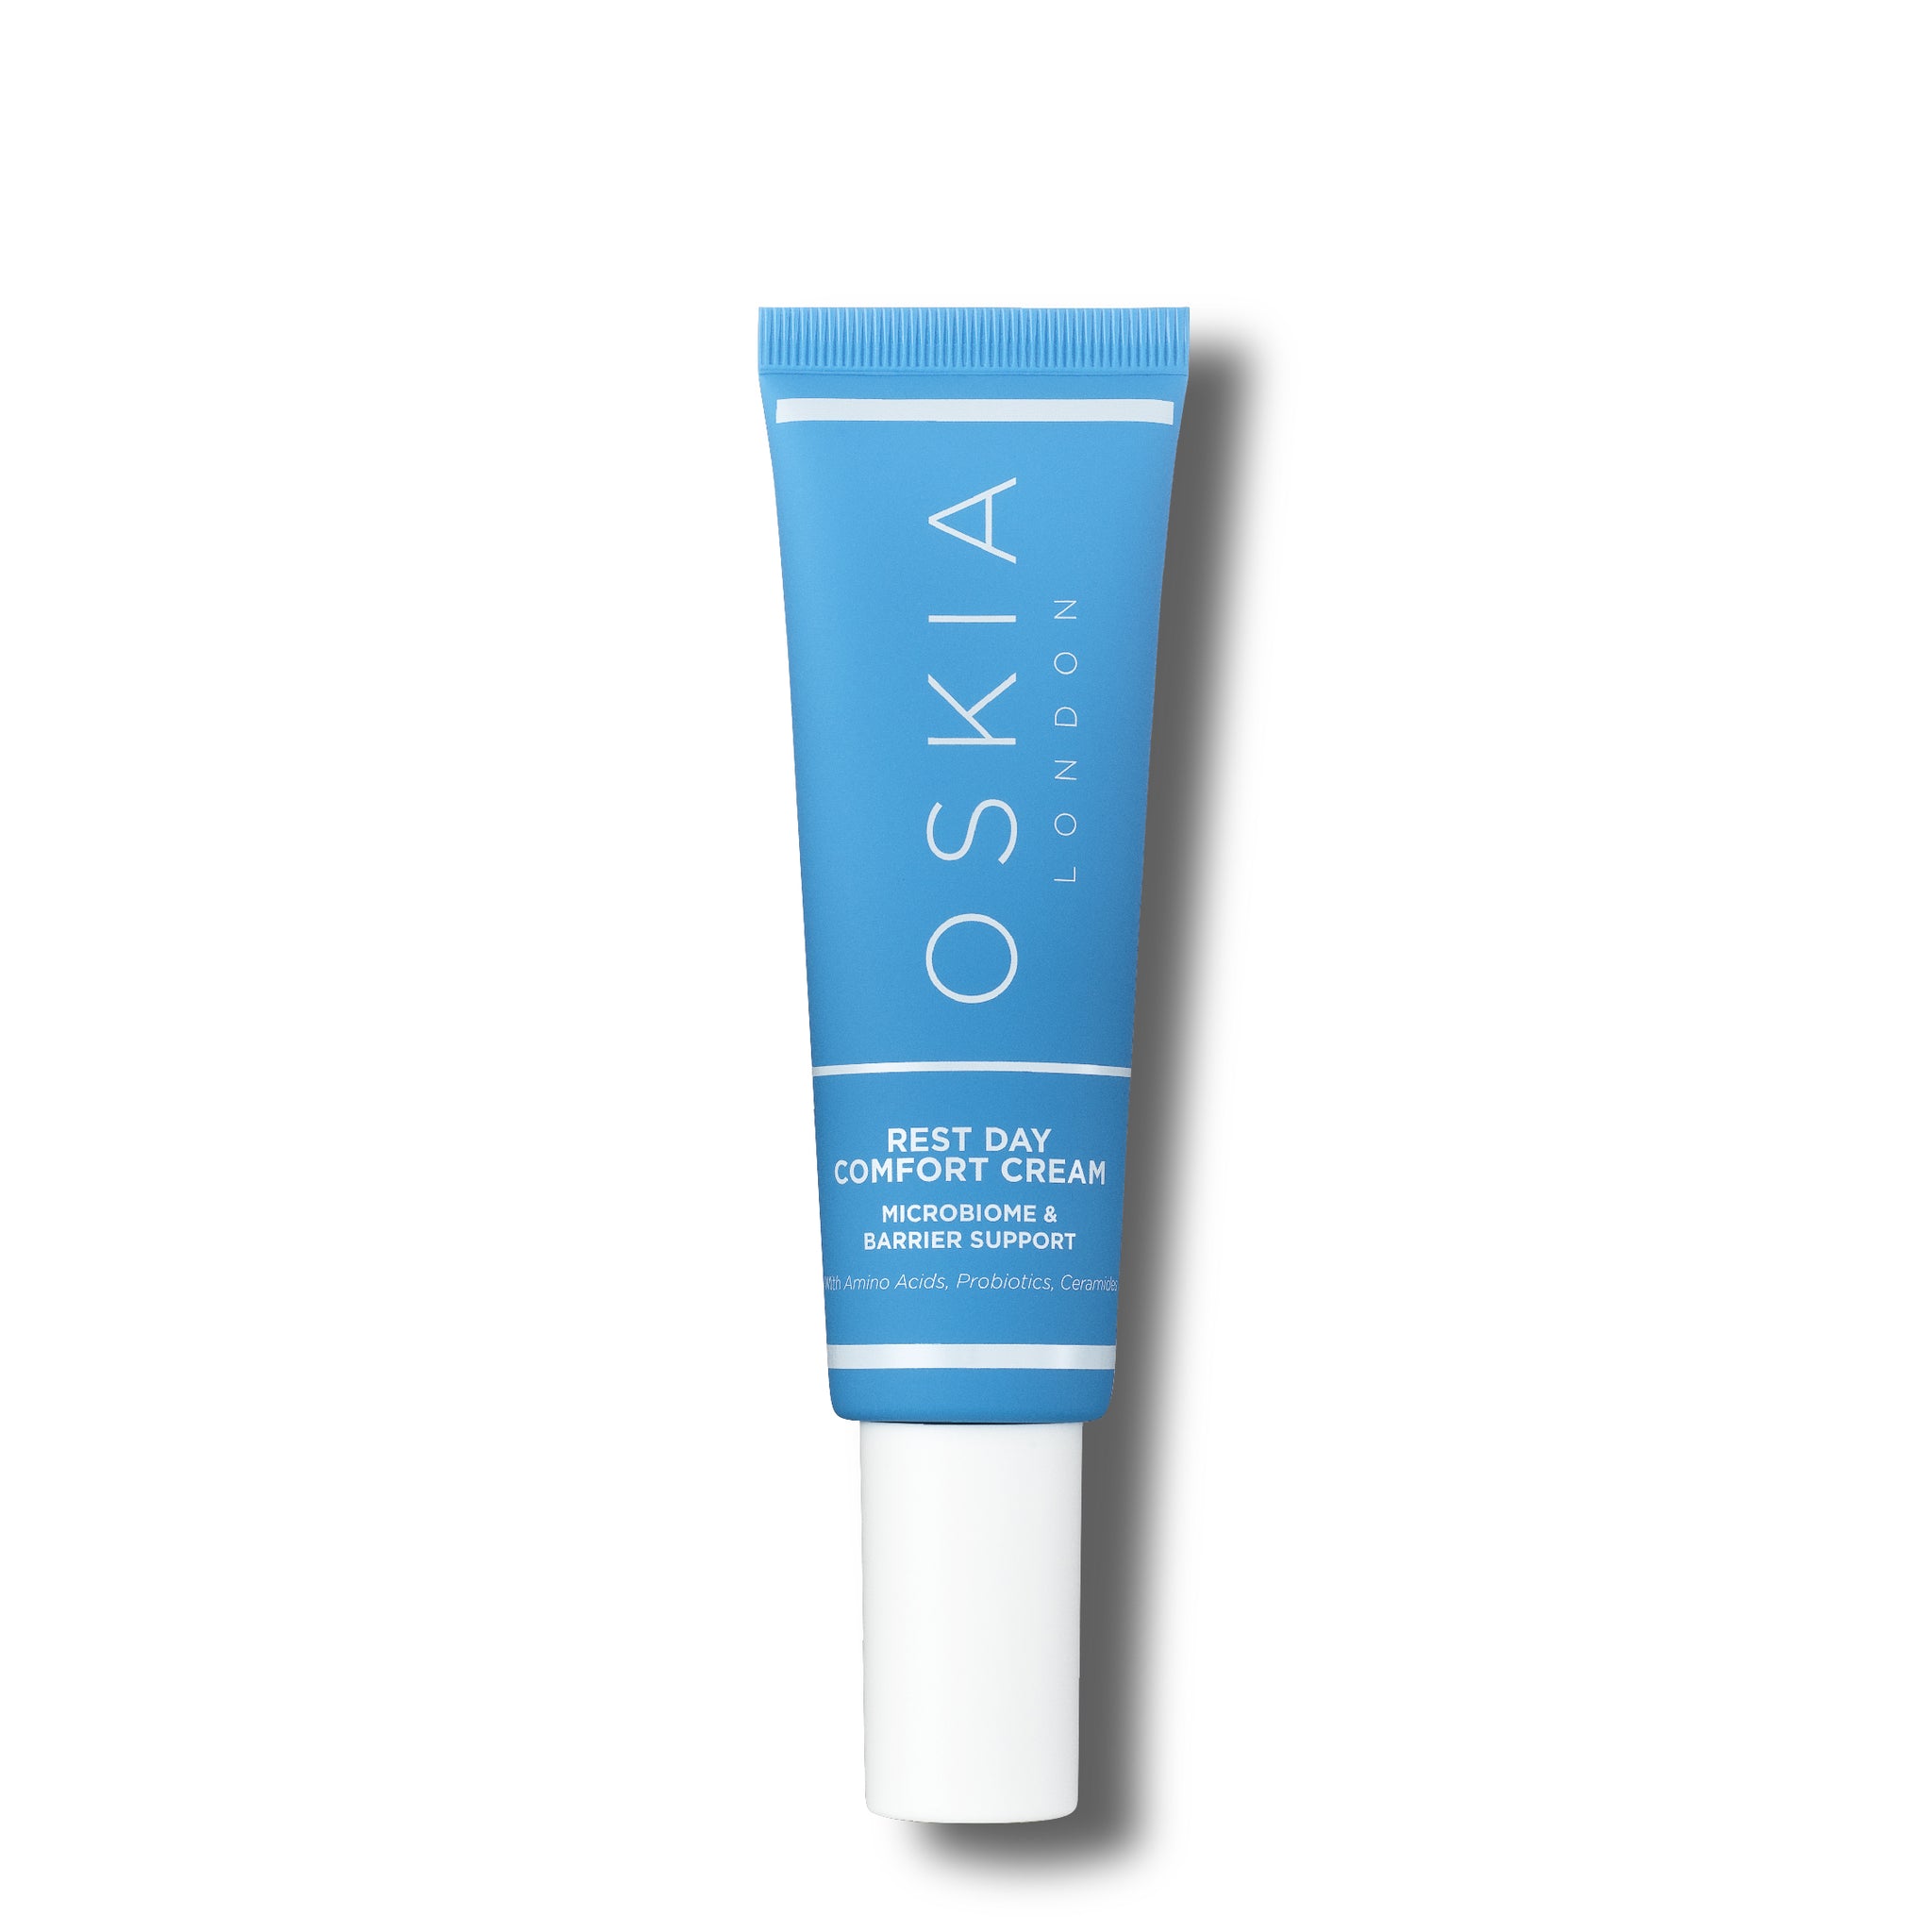 OSKIA Rest Day Comfort Cream Microbiome & Barrier Support 55 ml